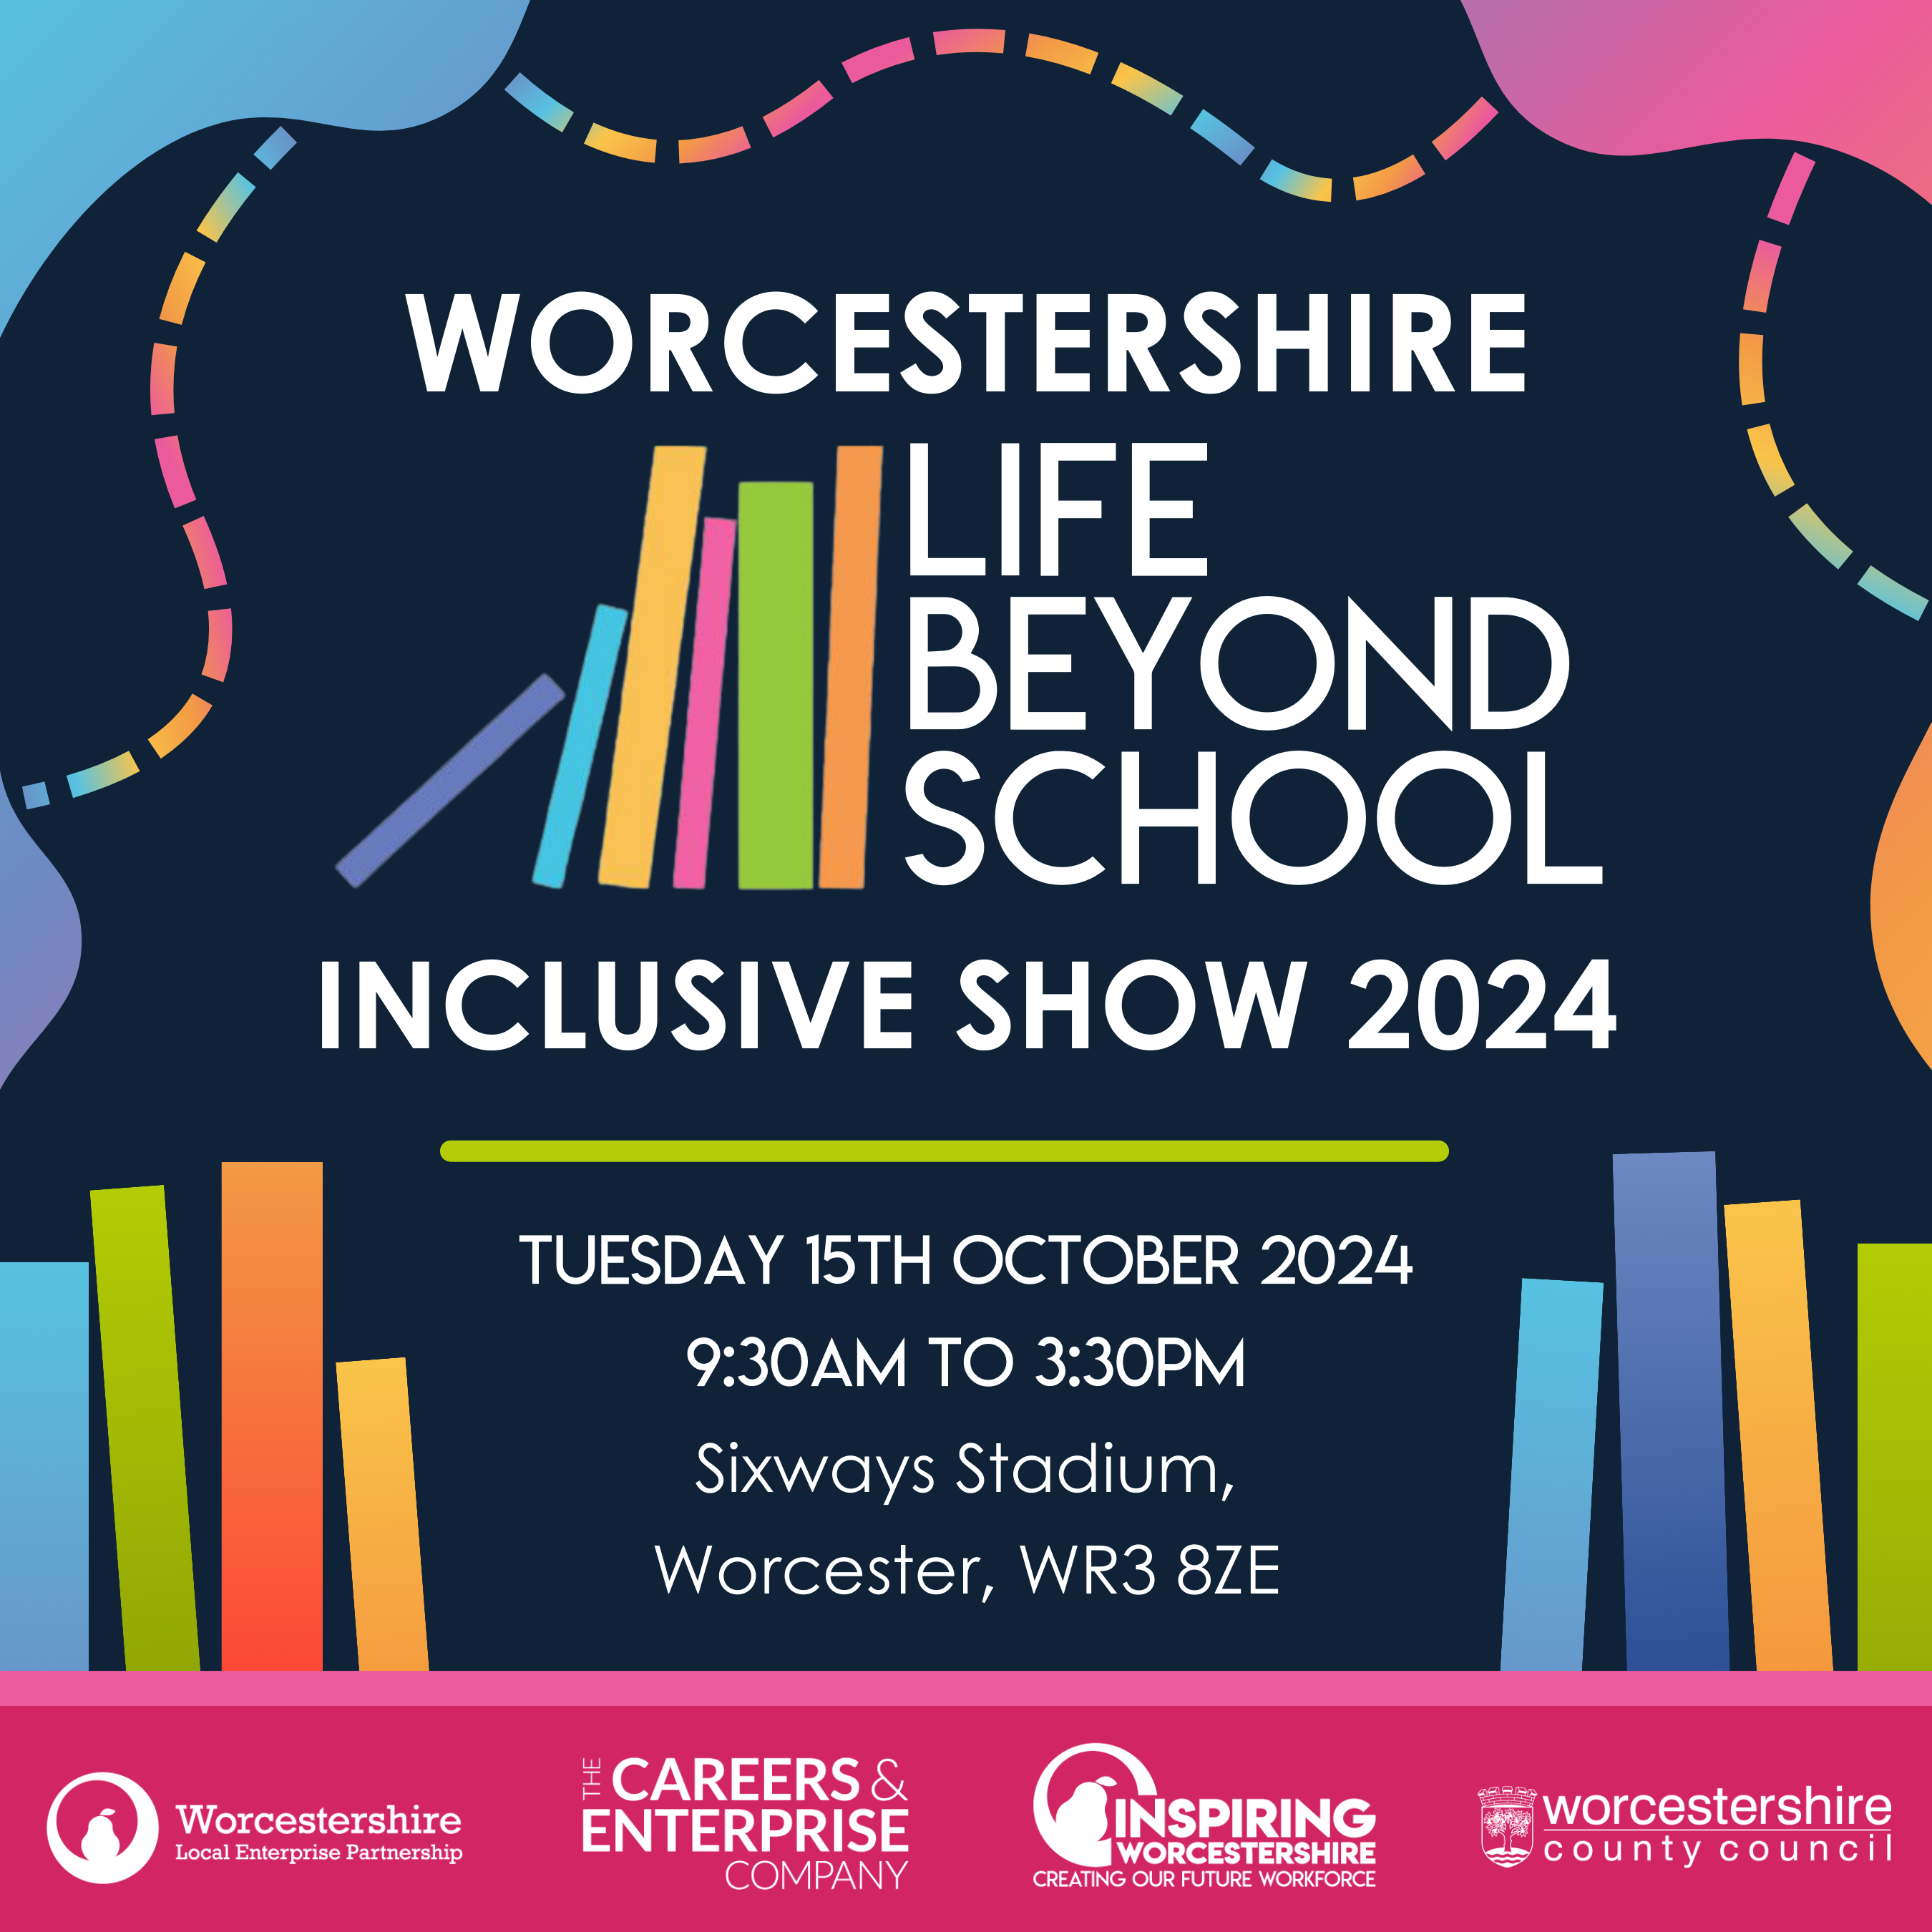 Worcestershire life beyond school inclusive show. Tuesday 15th October. 09:30am to 3:30pm. Sixways Stadium 